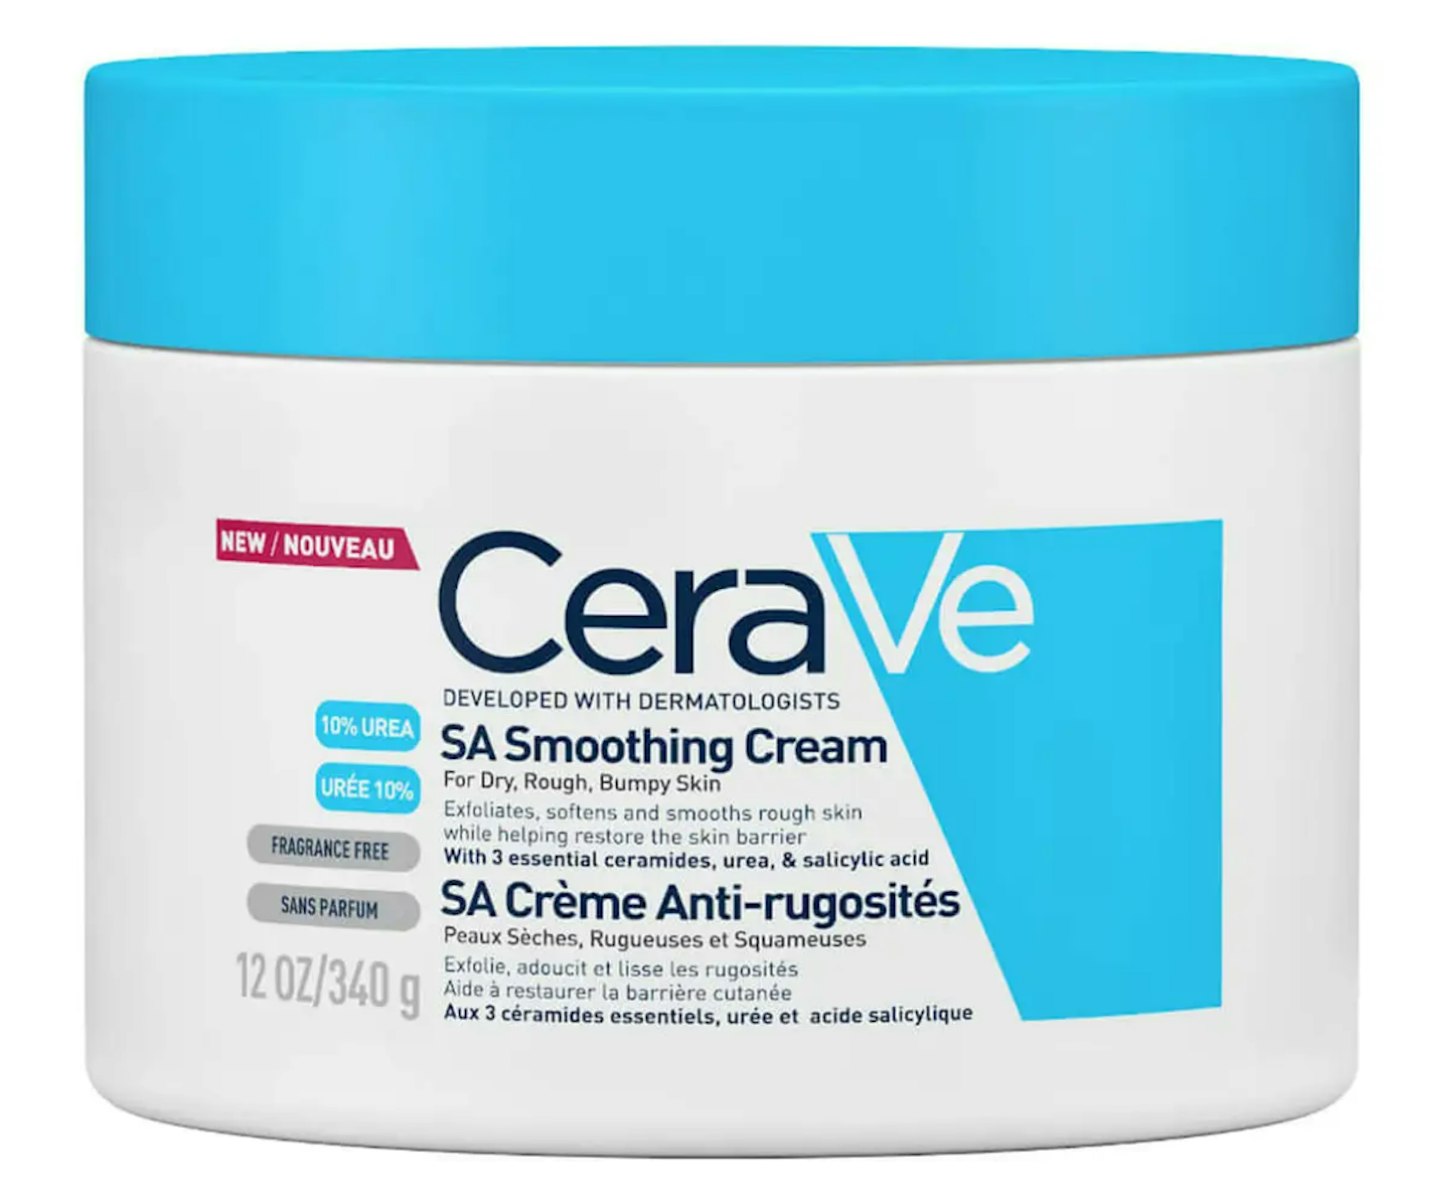 A picture of the CeraVe Smoothing Cream